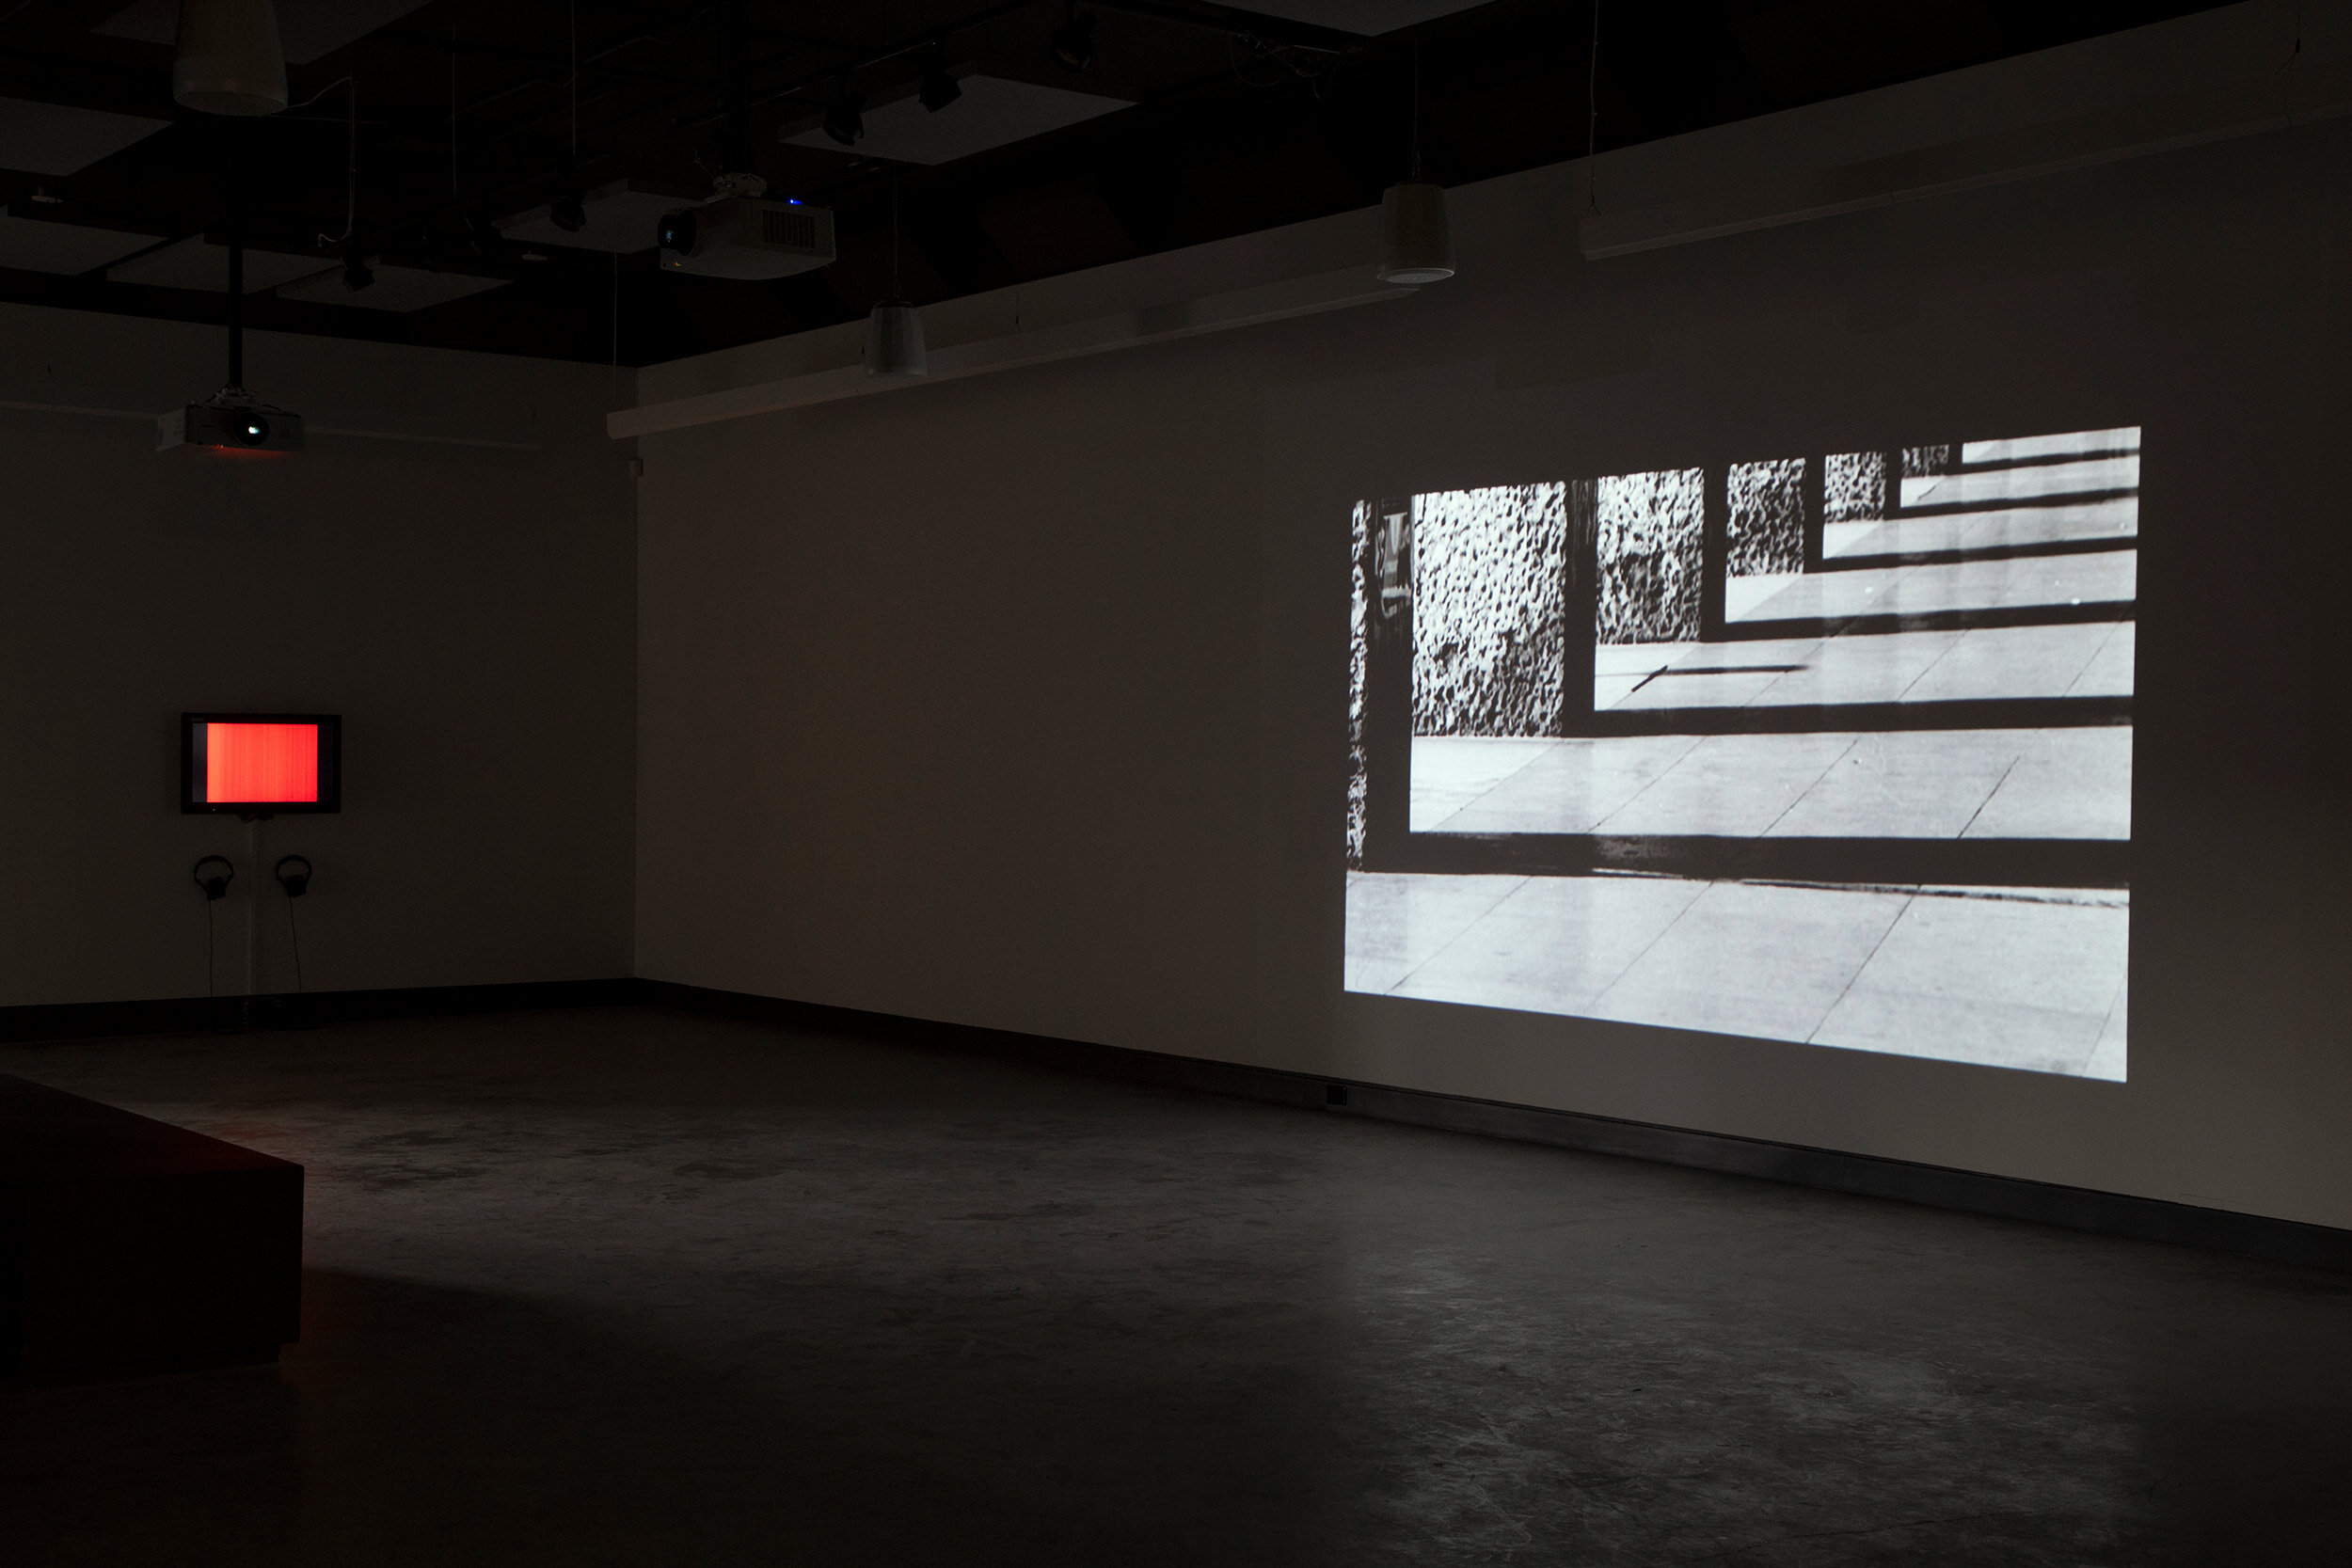  © Installation view of the exhibition  Electronic Sound in a Shifting Landscape , Dazibao, 2014. Photo: Sara A. Tremblay. 